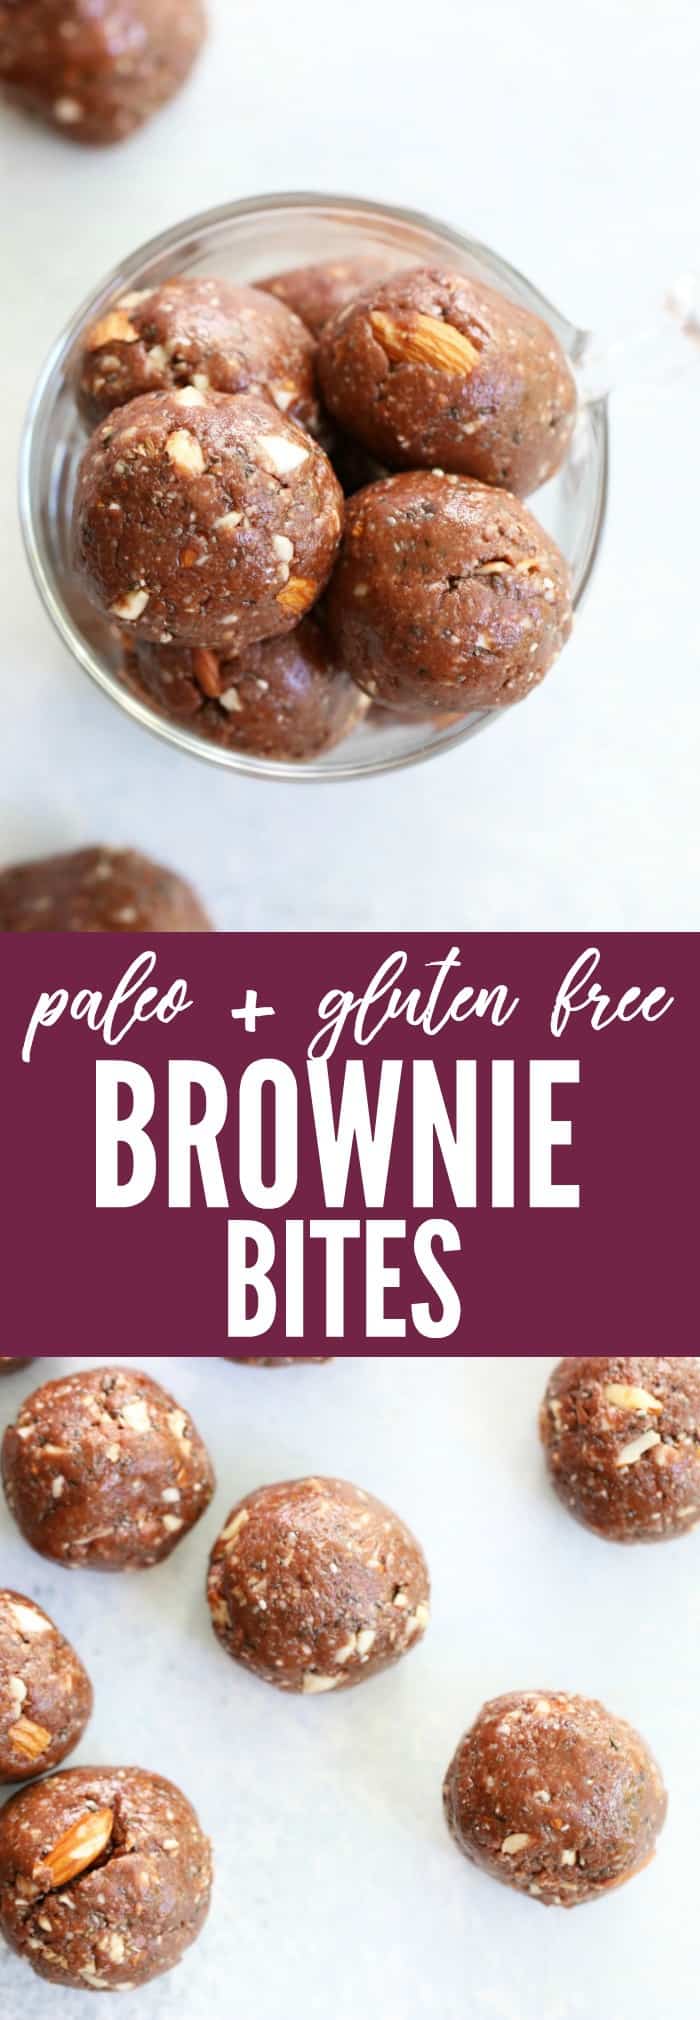 Really fun and delicious Paleo + Gluten Free Brownie Bites that are packed with protein + amazing for that afternoon hanger! Perfect snack to pack! thetoastedpinenut.com